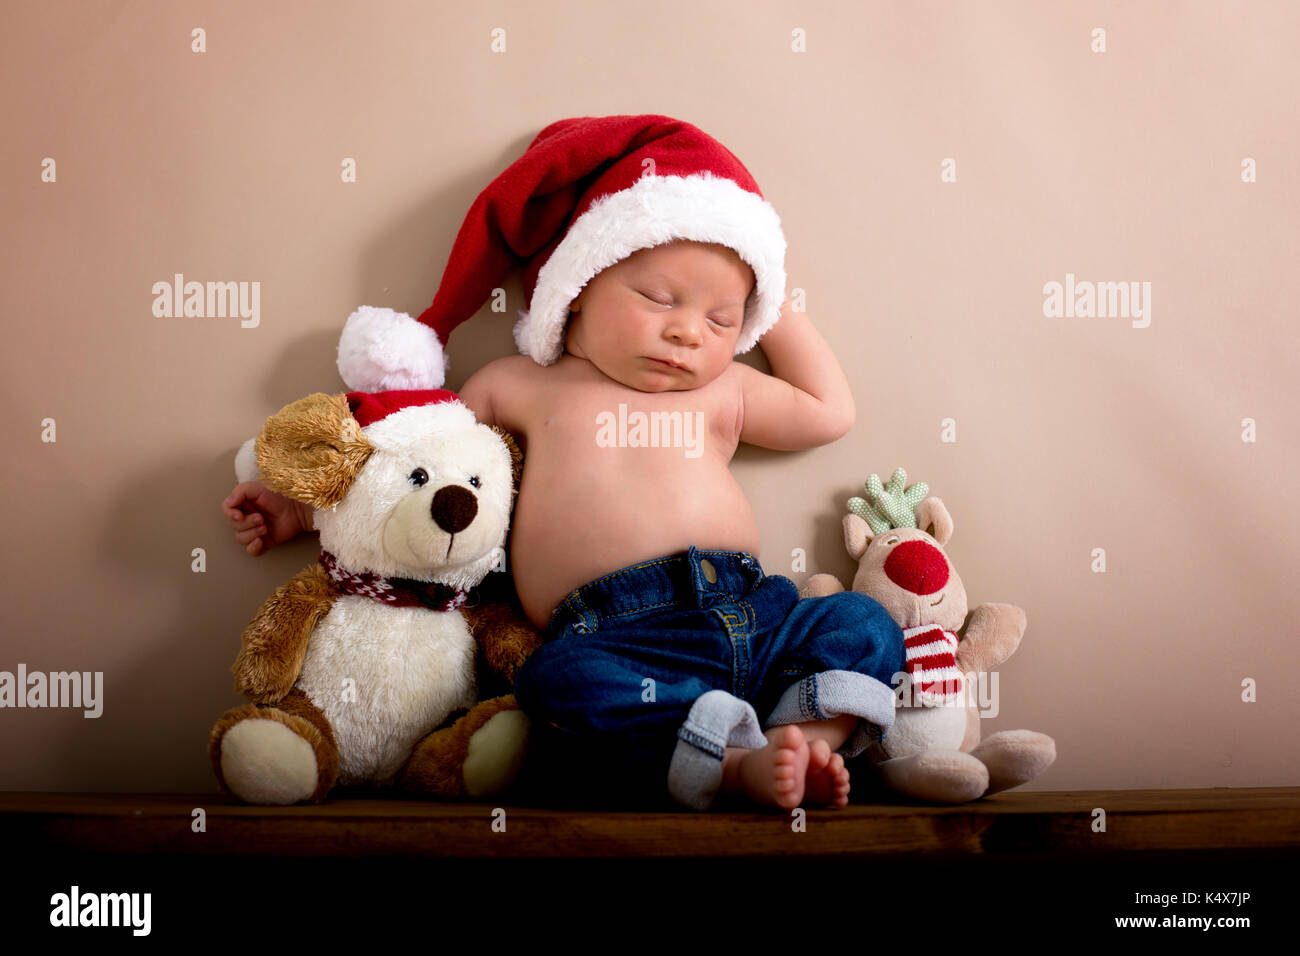 Newborn baby boy wearing a christmas hat and jeans, sleeping on a shelf next  to Teddy Bears. Shot in the studio on a creamy background, shot from abov  Stock Photo - Alamy